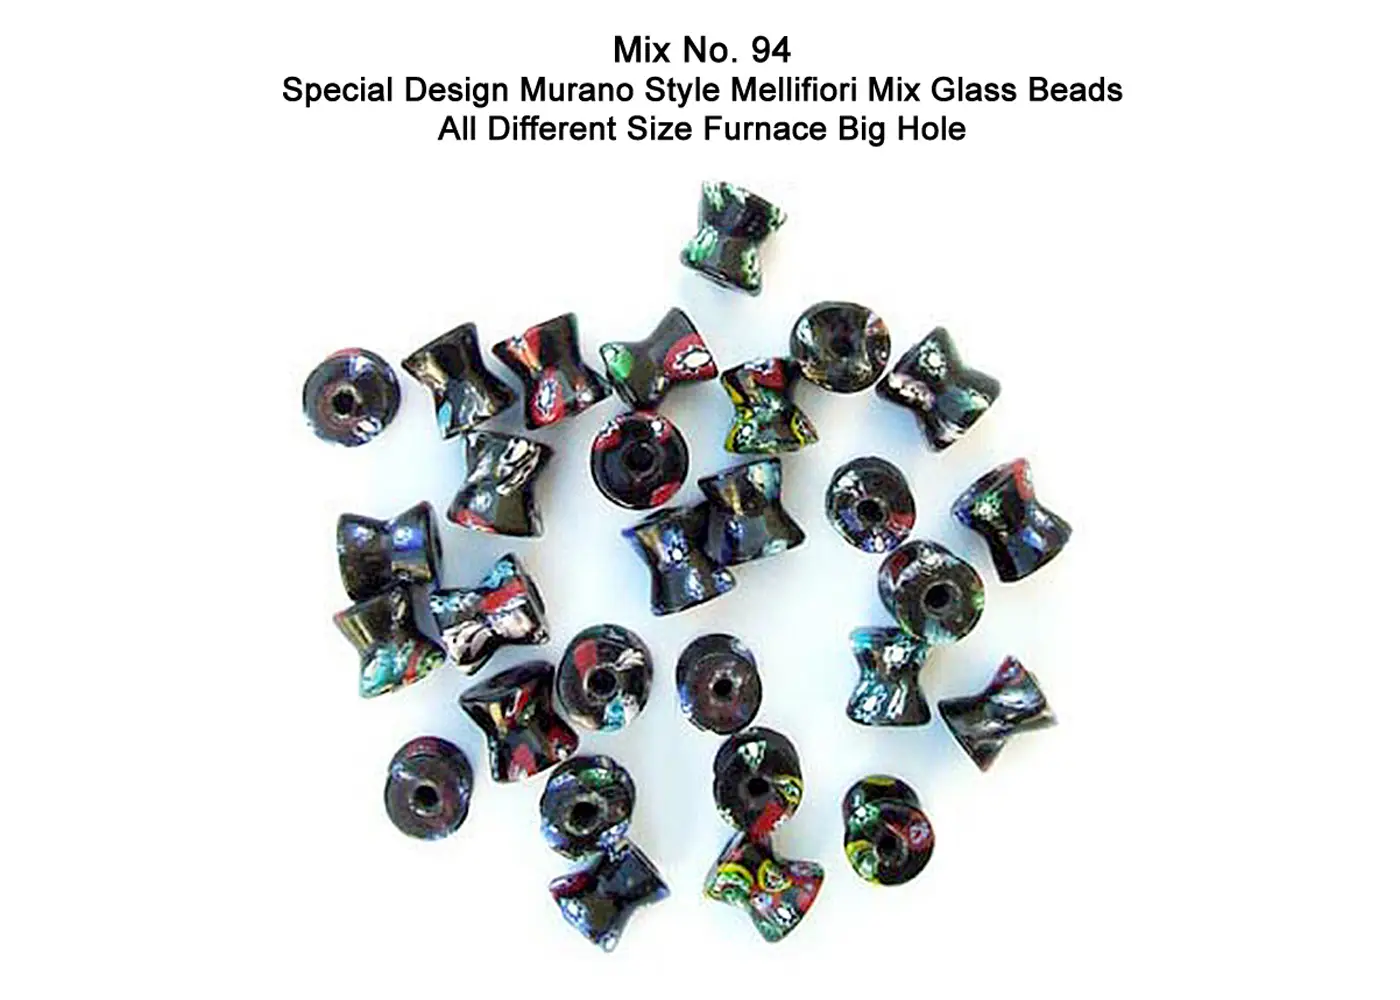 Special design murano style mellifiori mix glass beads all different size farnace big hole